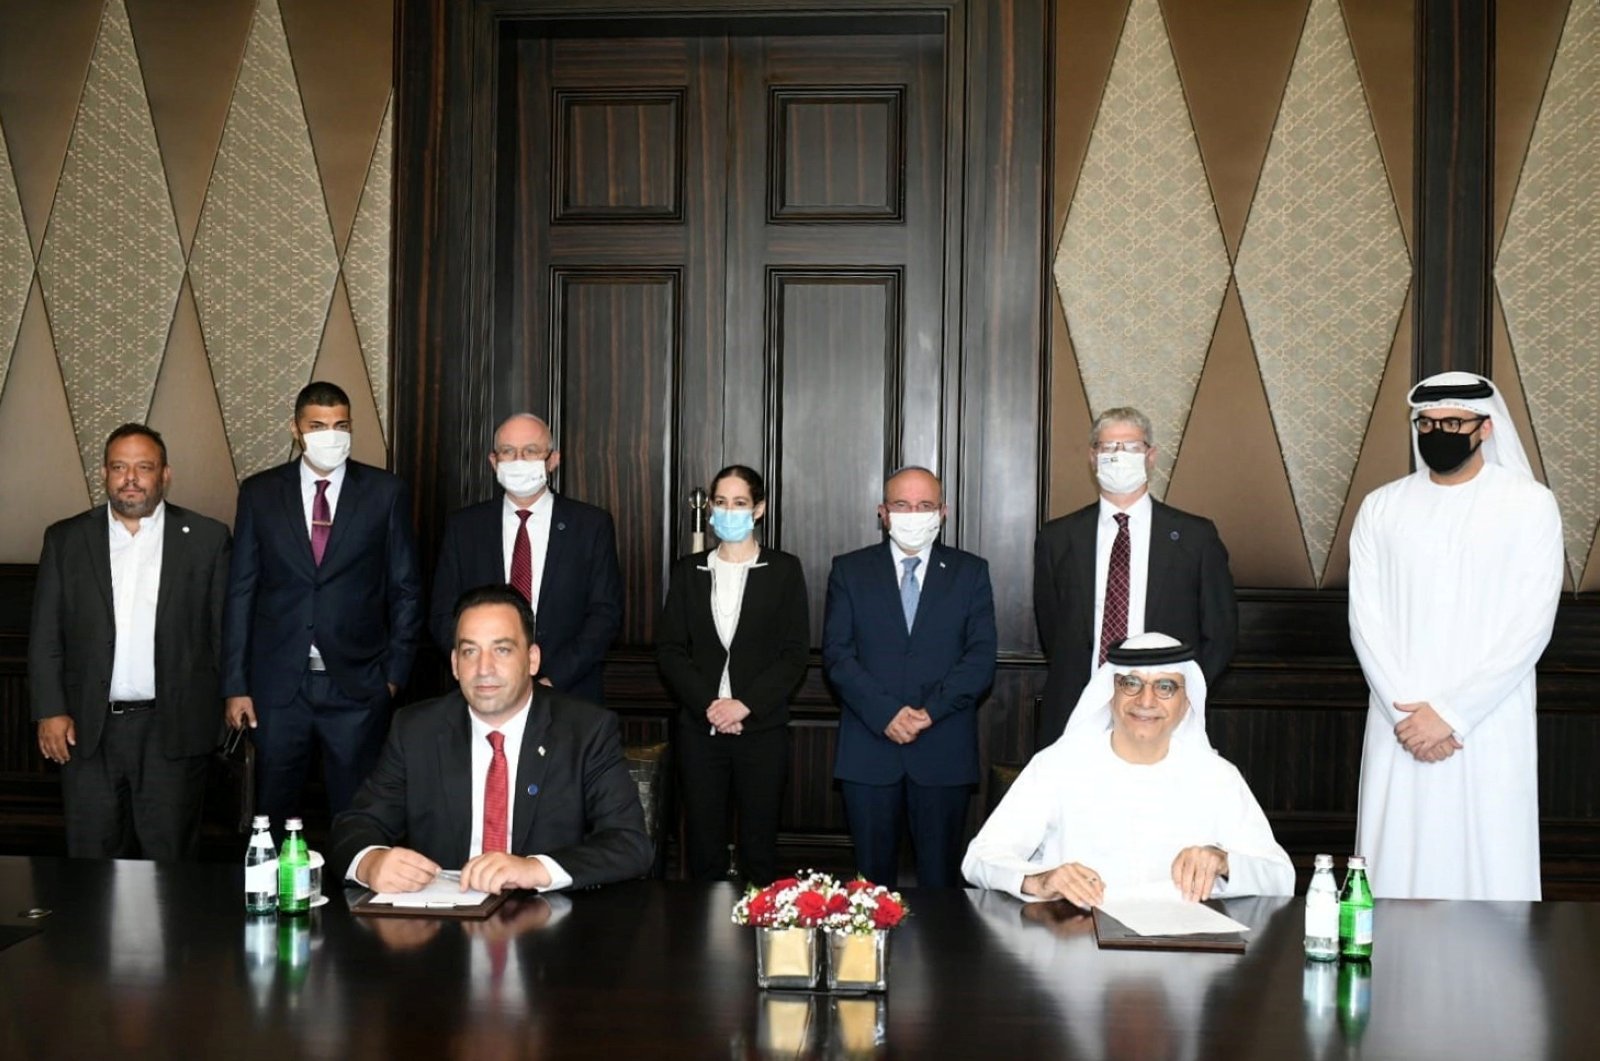 Israeli National Security Advisor Meir Ben-Shabbat stands as the Israeli and Emirati officials sign documents in Abu Dhabi, United Arab Emirates, Sept. 1, 2020. (REUTERS Photo)